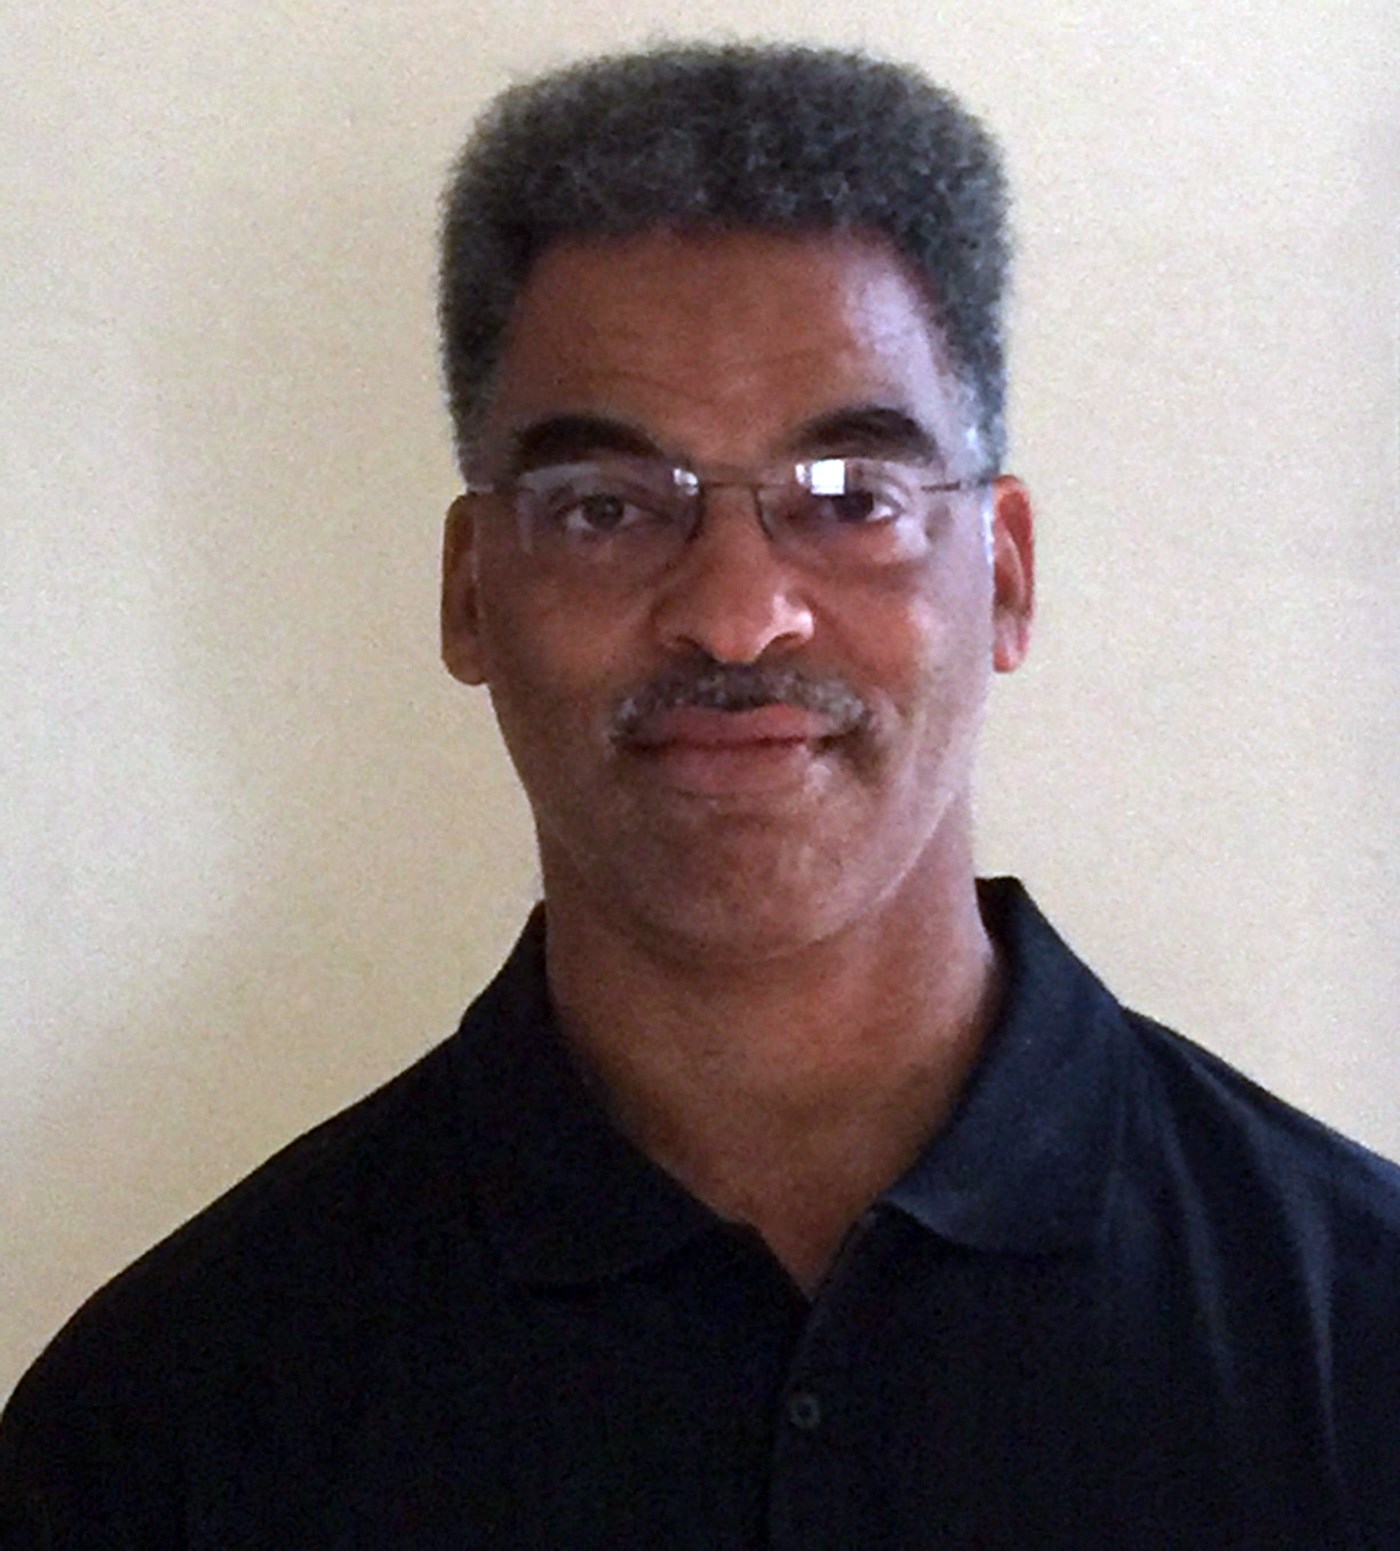 Demetrius A. Lamar is a Adjunct Faculty member in the department of Sociology at UMass Lowell.